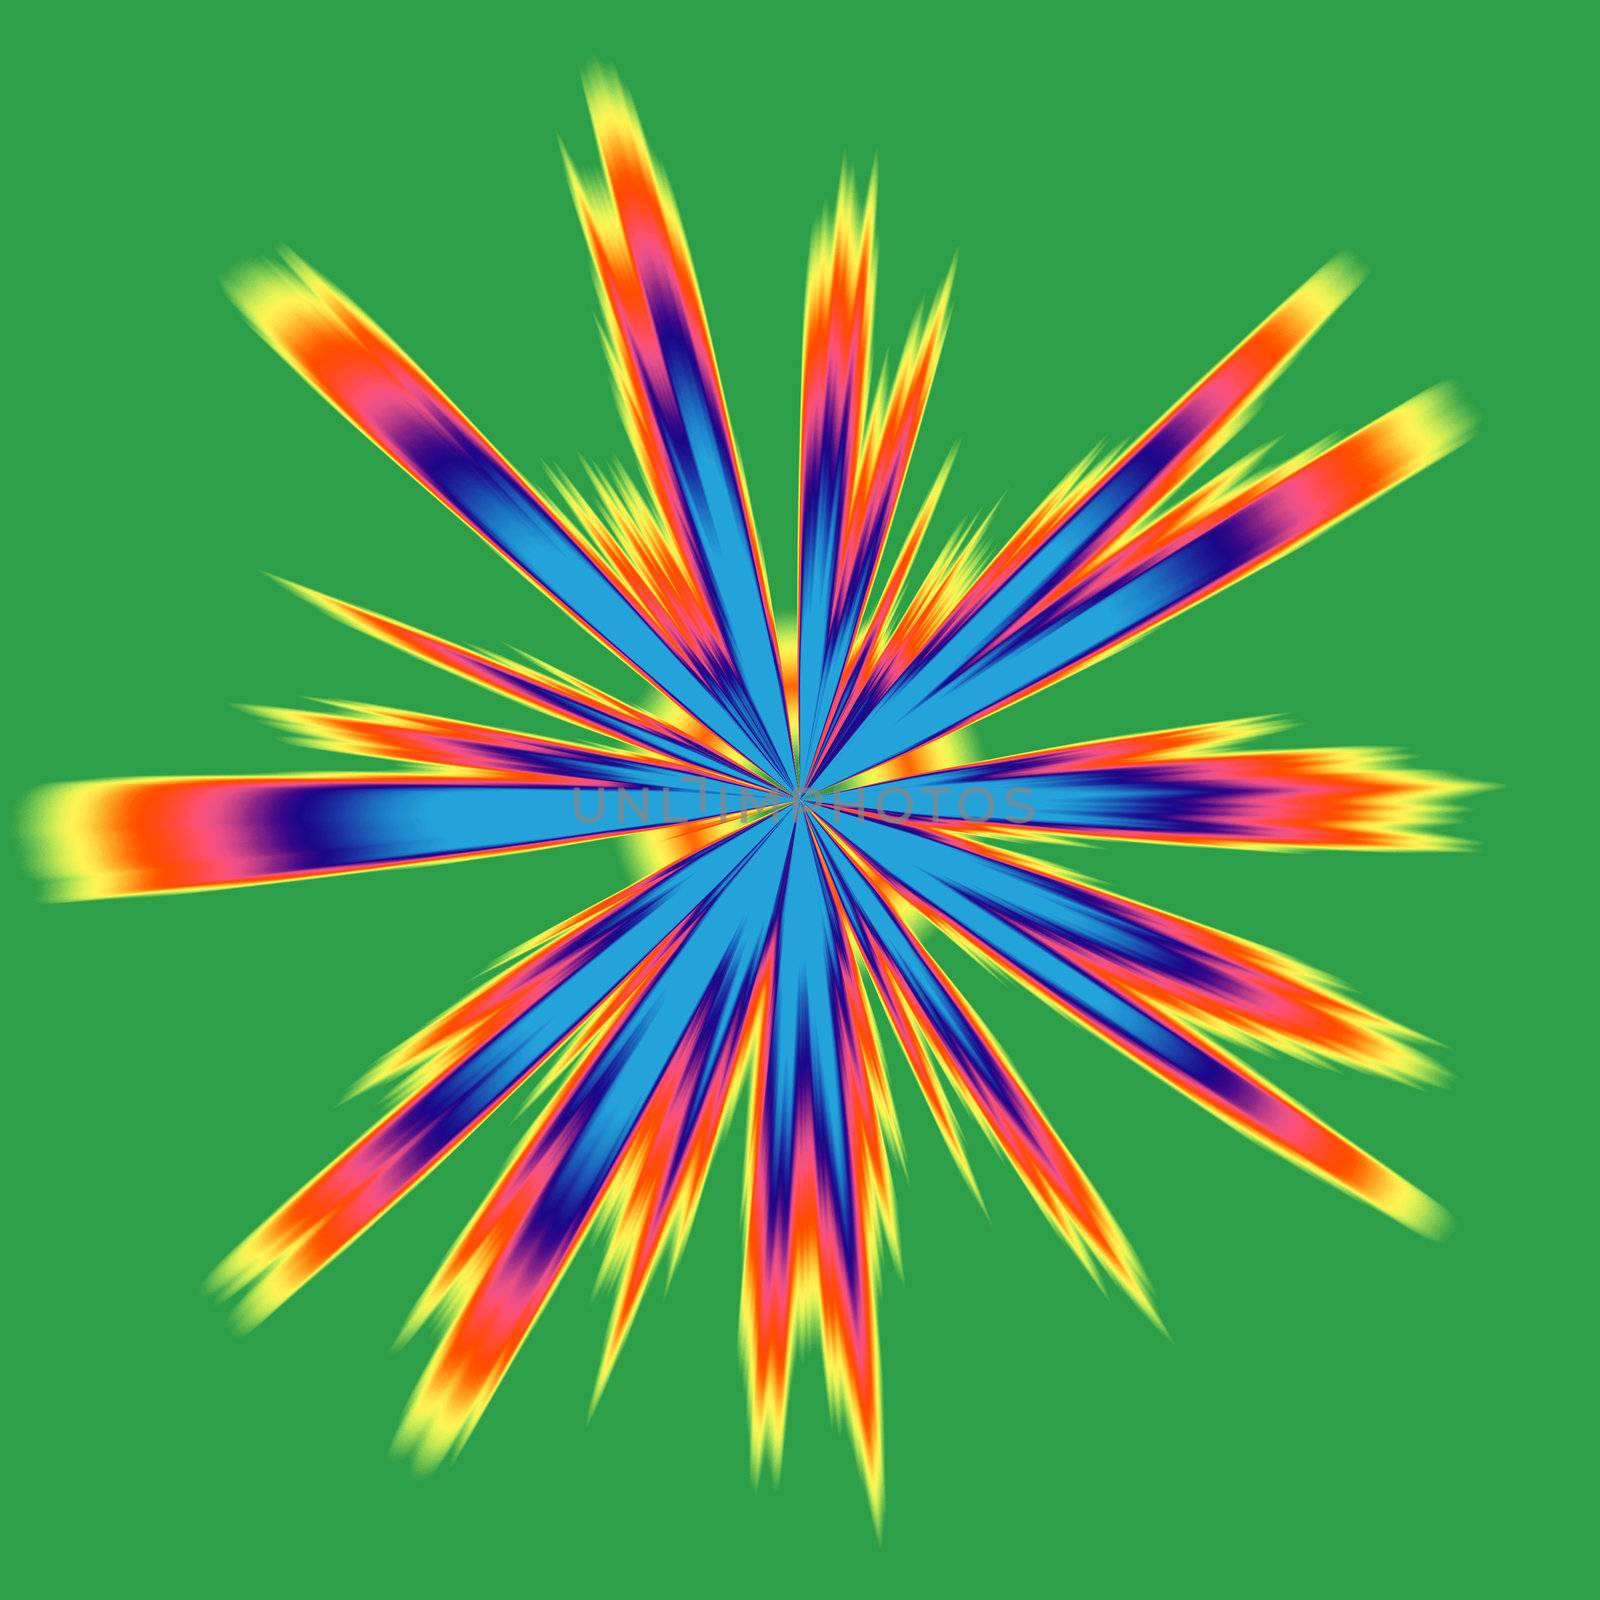 starburst or firework in rainbow colors over green